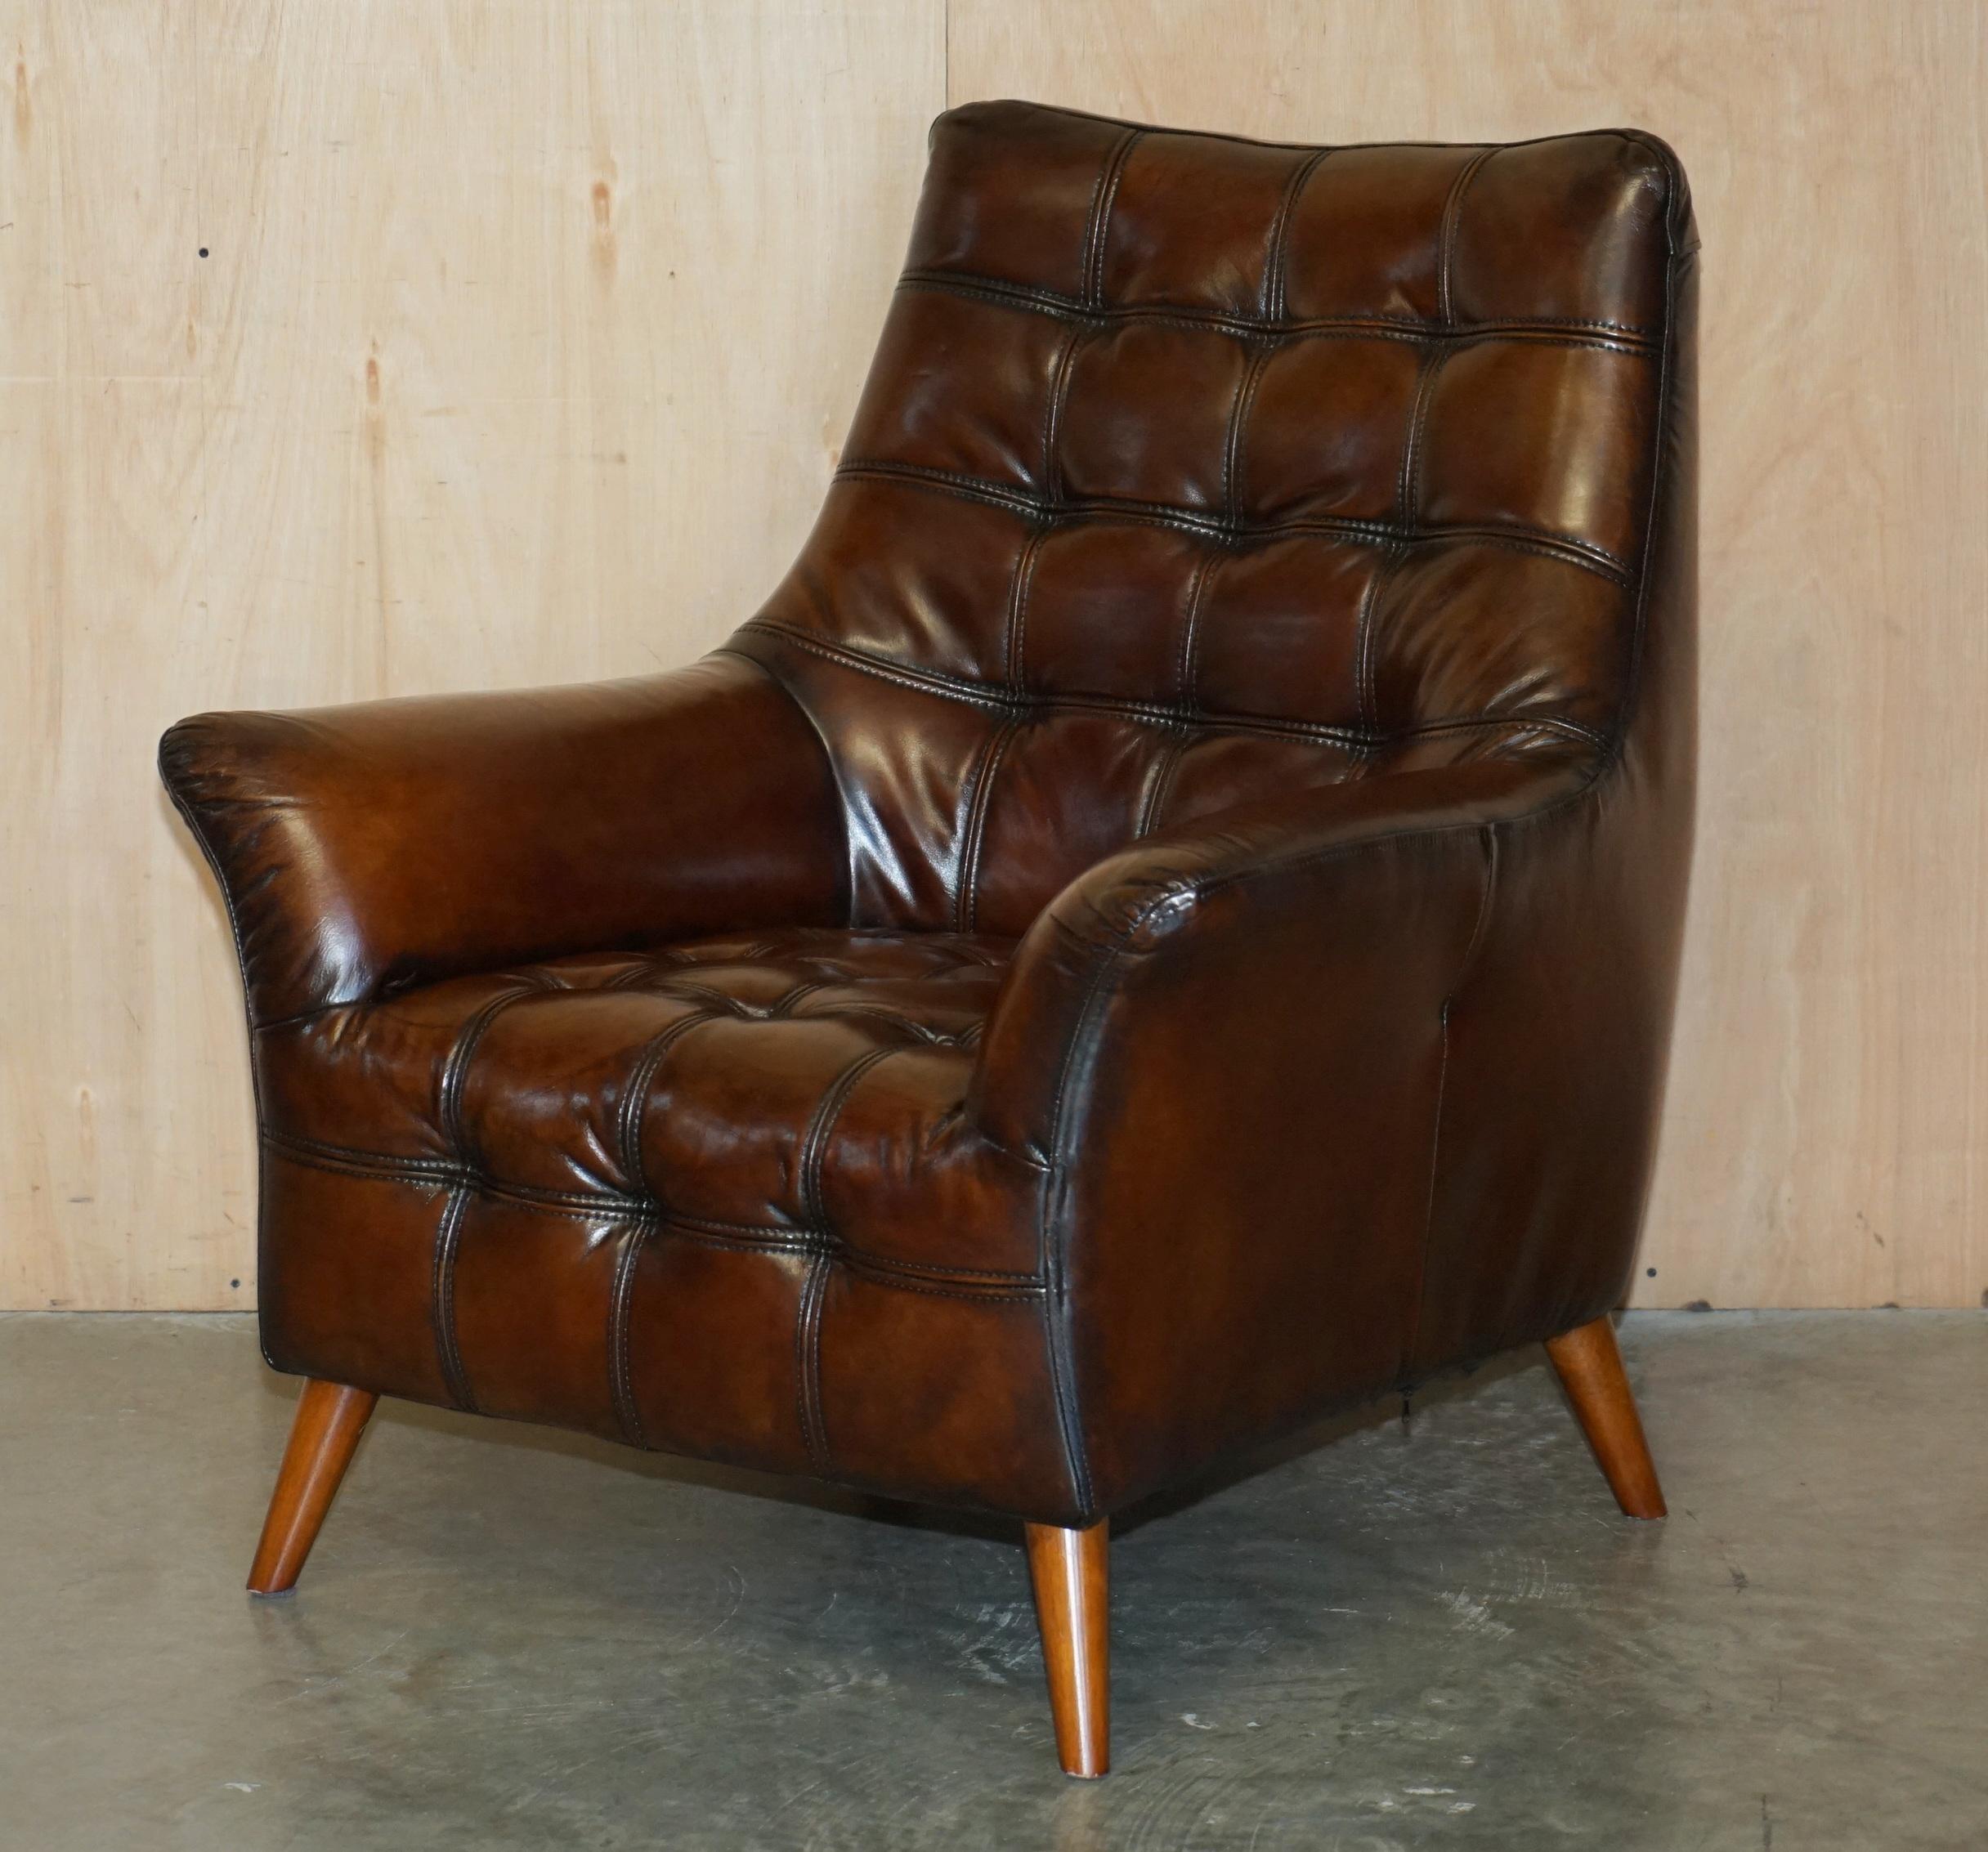 Royal House Antiques

Royal House Antiques is delighted to offer for sale this stunning pair of fully restored Vintage hand dyed Cigar brown leather Art Modern, Chesterfield high back armchairs 

Please note the delivery fee listed is just a guide,